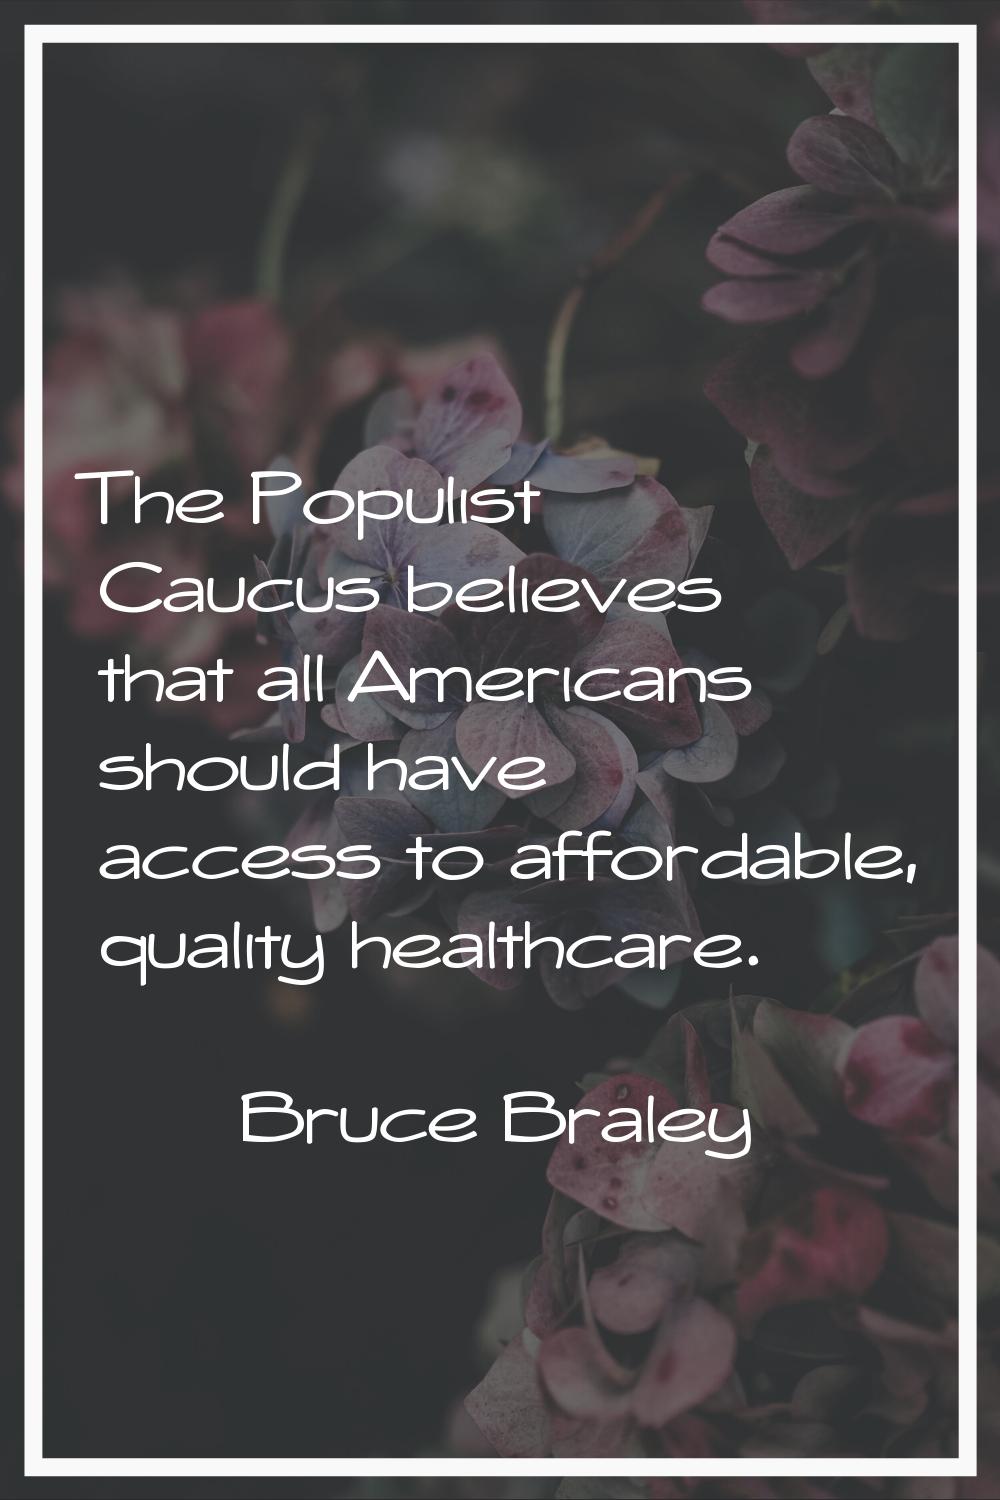 The Populist Caucus believes that all Americans should have access to affordable, quality healthcar